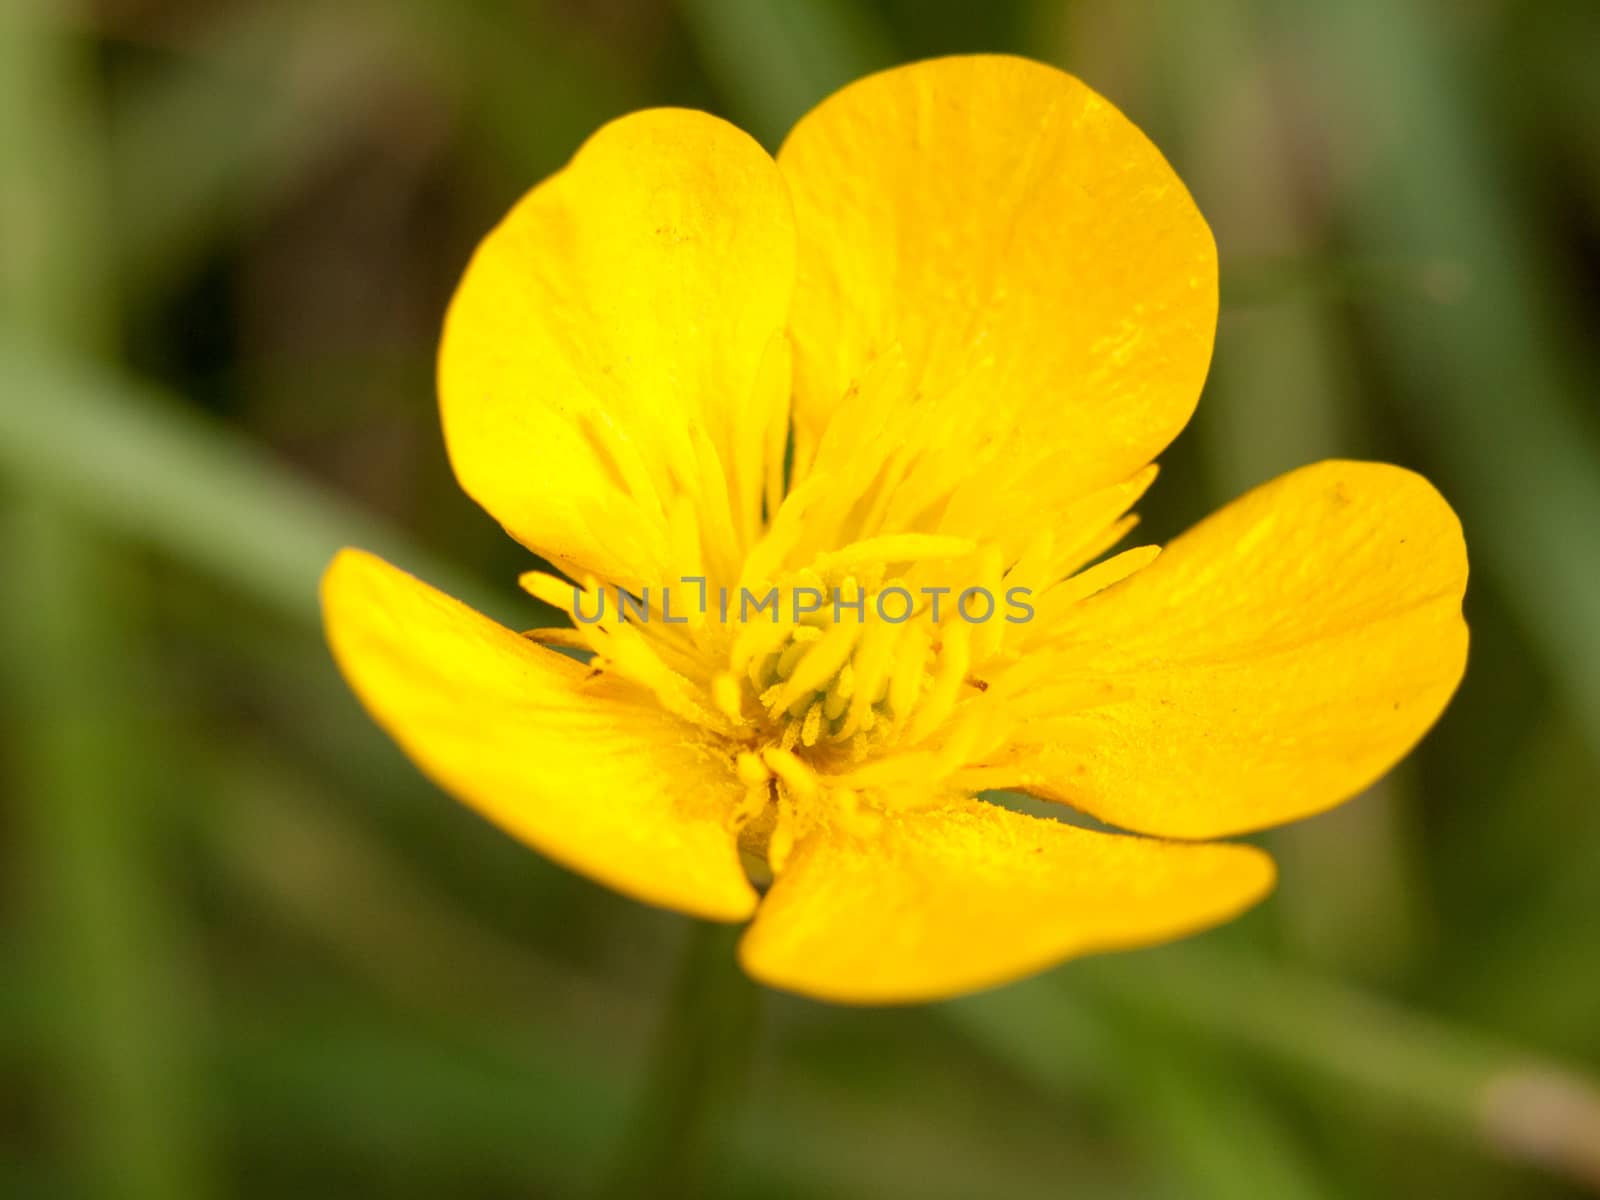 a gorgeous buttercup close up macro detail yellow and green grass and leaf background blur in spring